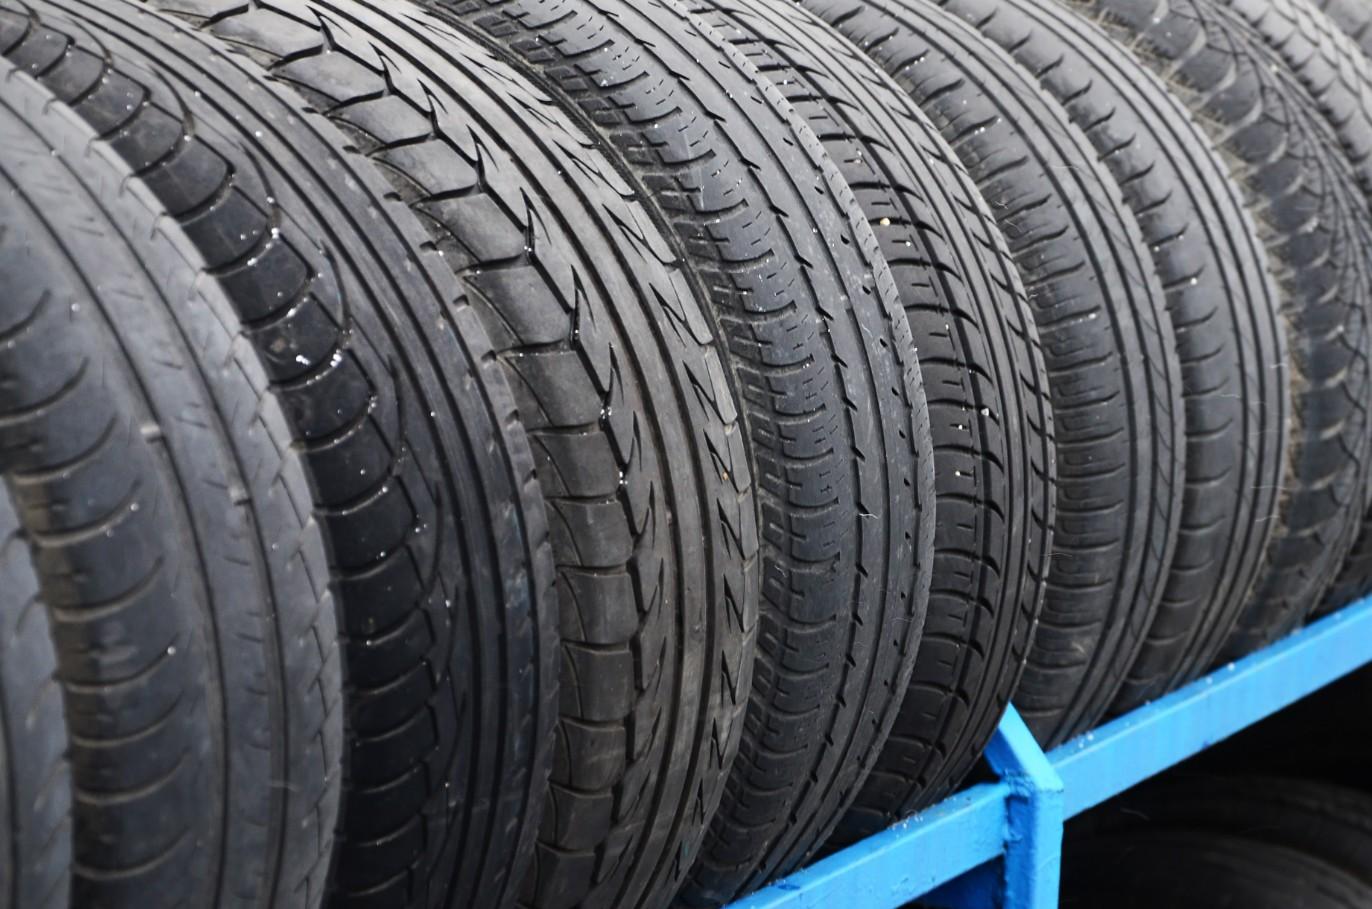 Consumer Reports selected the best car tires in several key categories.